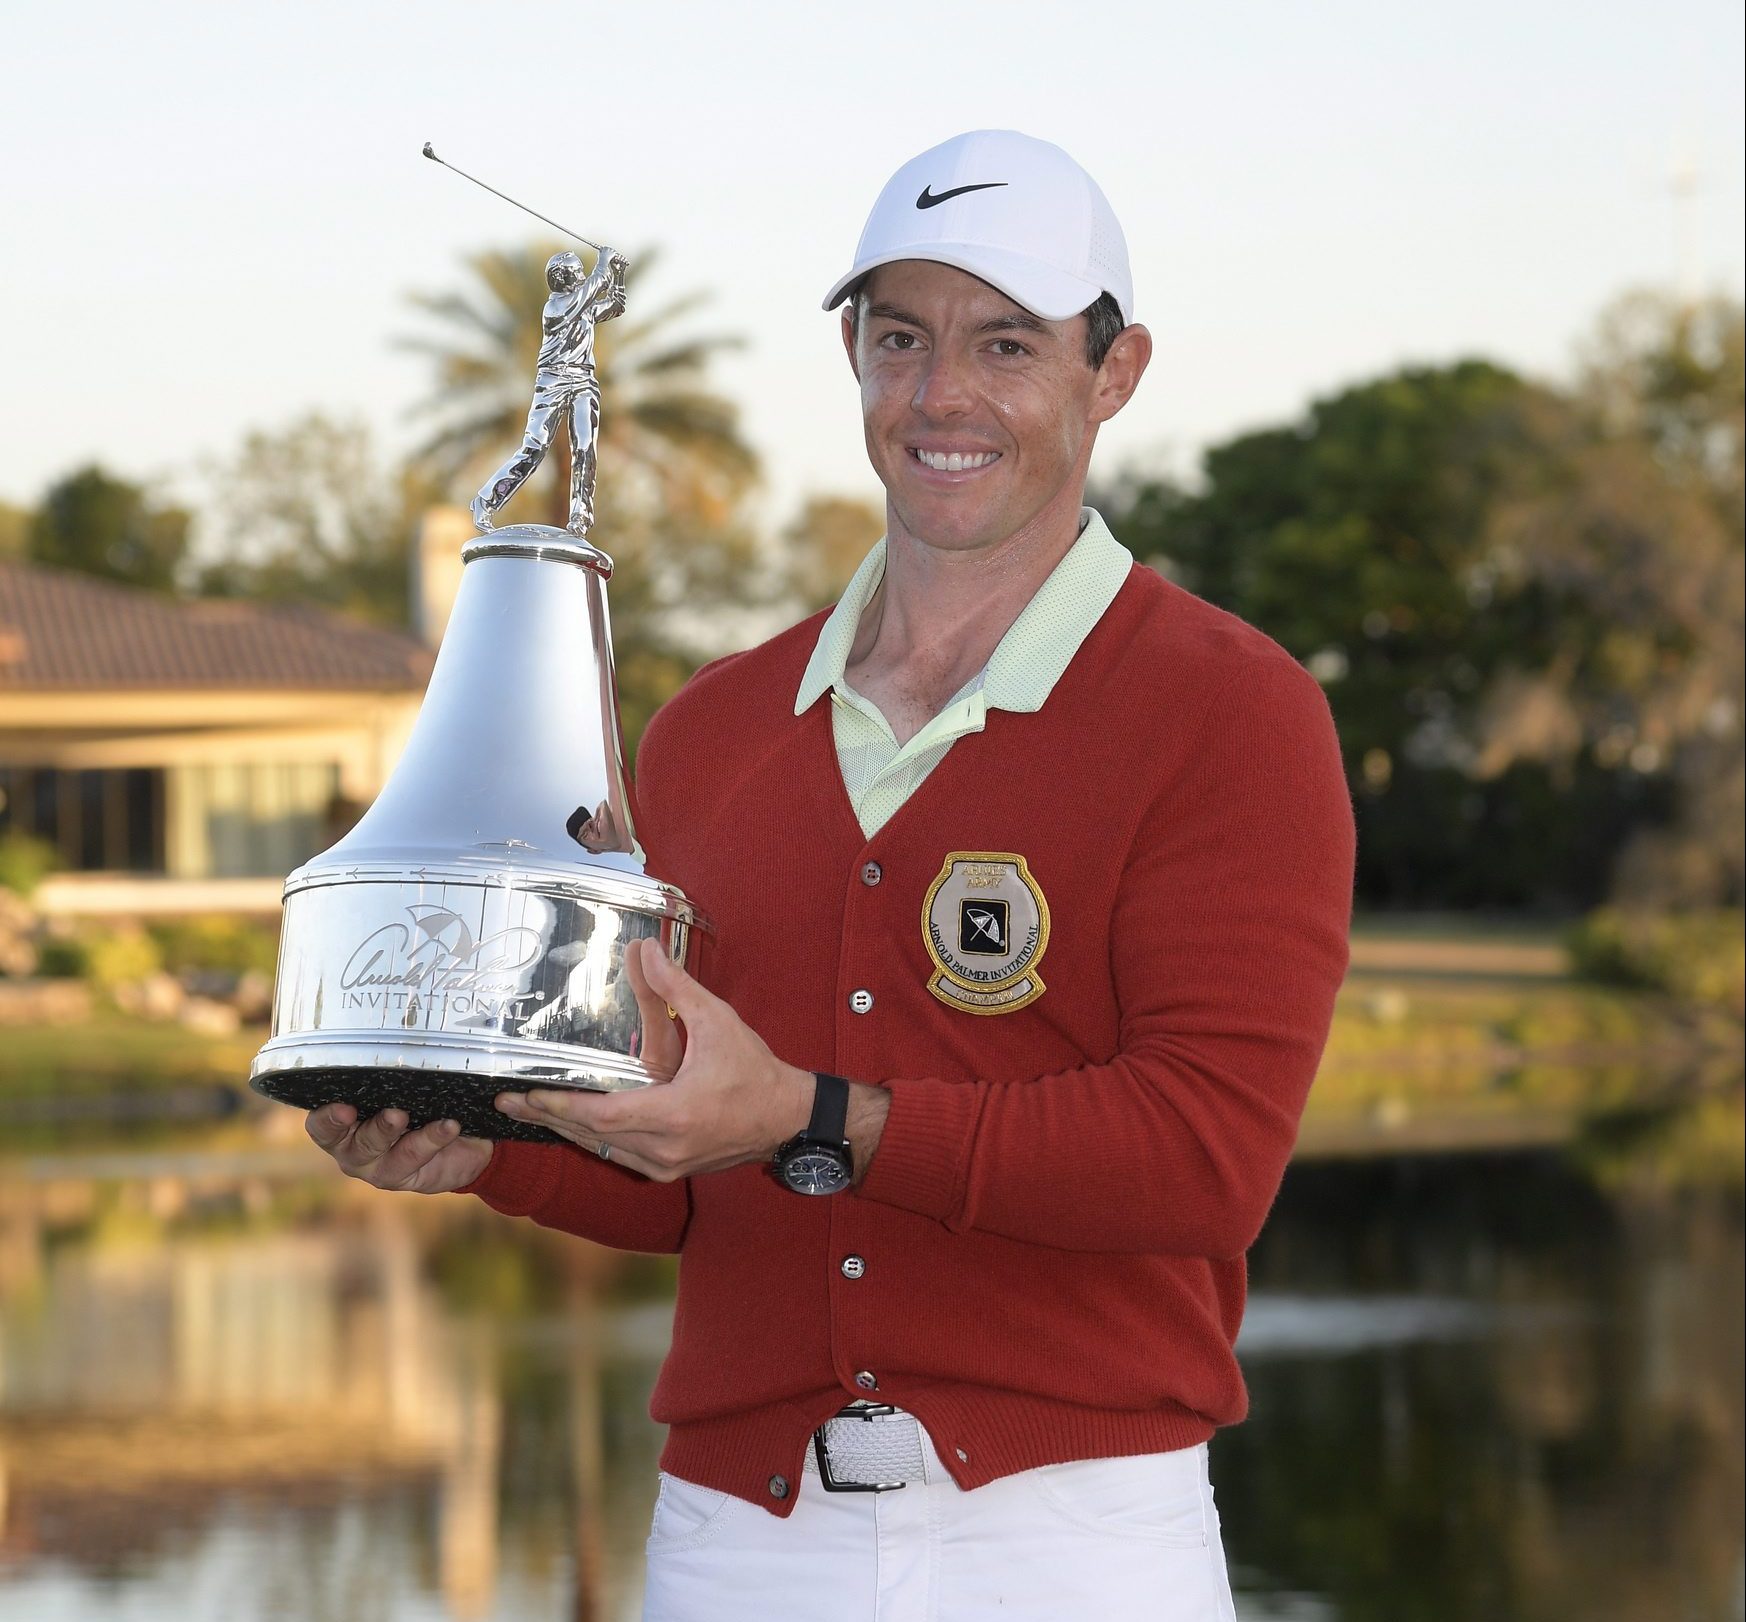 Rory McIlroy with the champion trophy at the 2018 Arnold Palmer Invitational